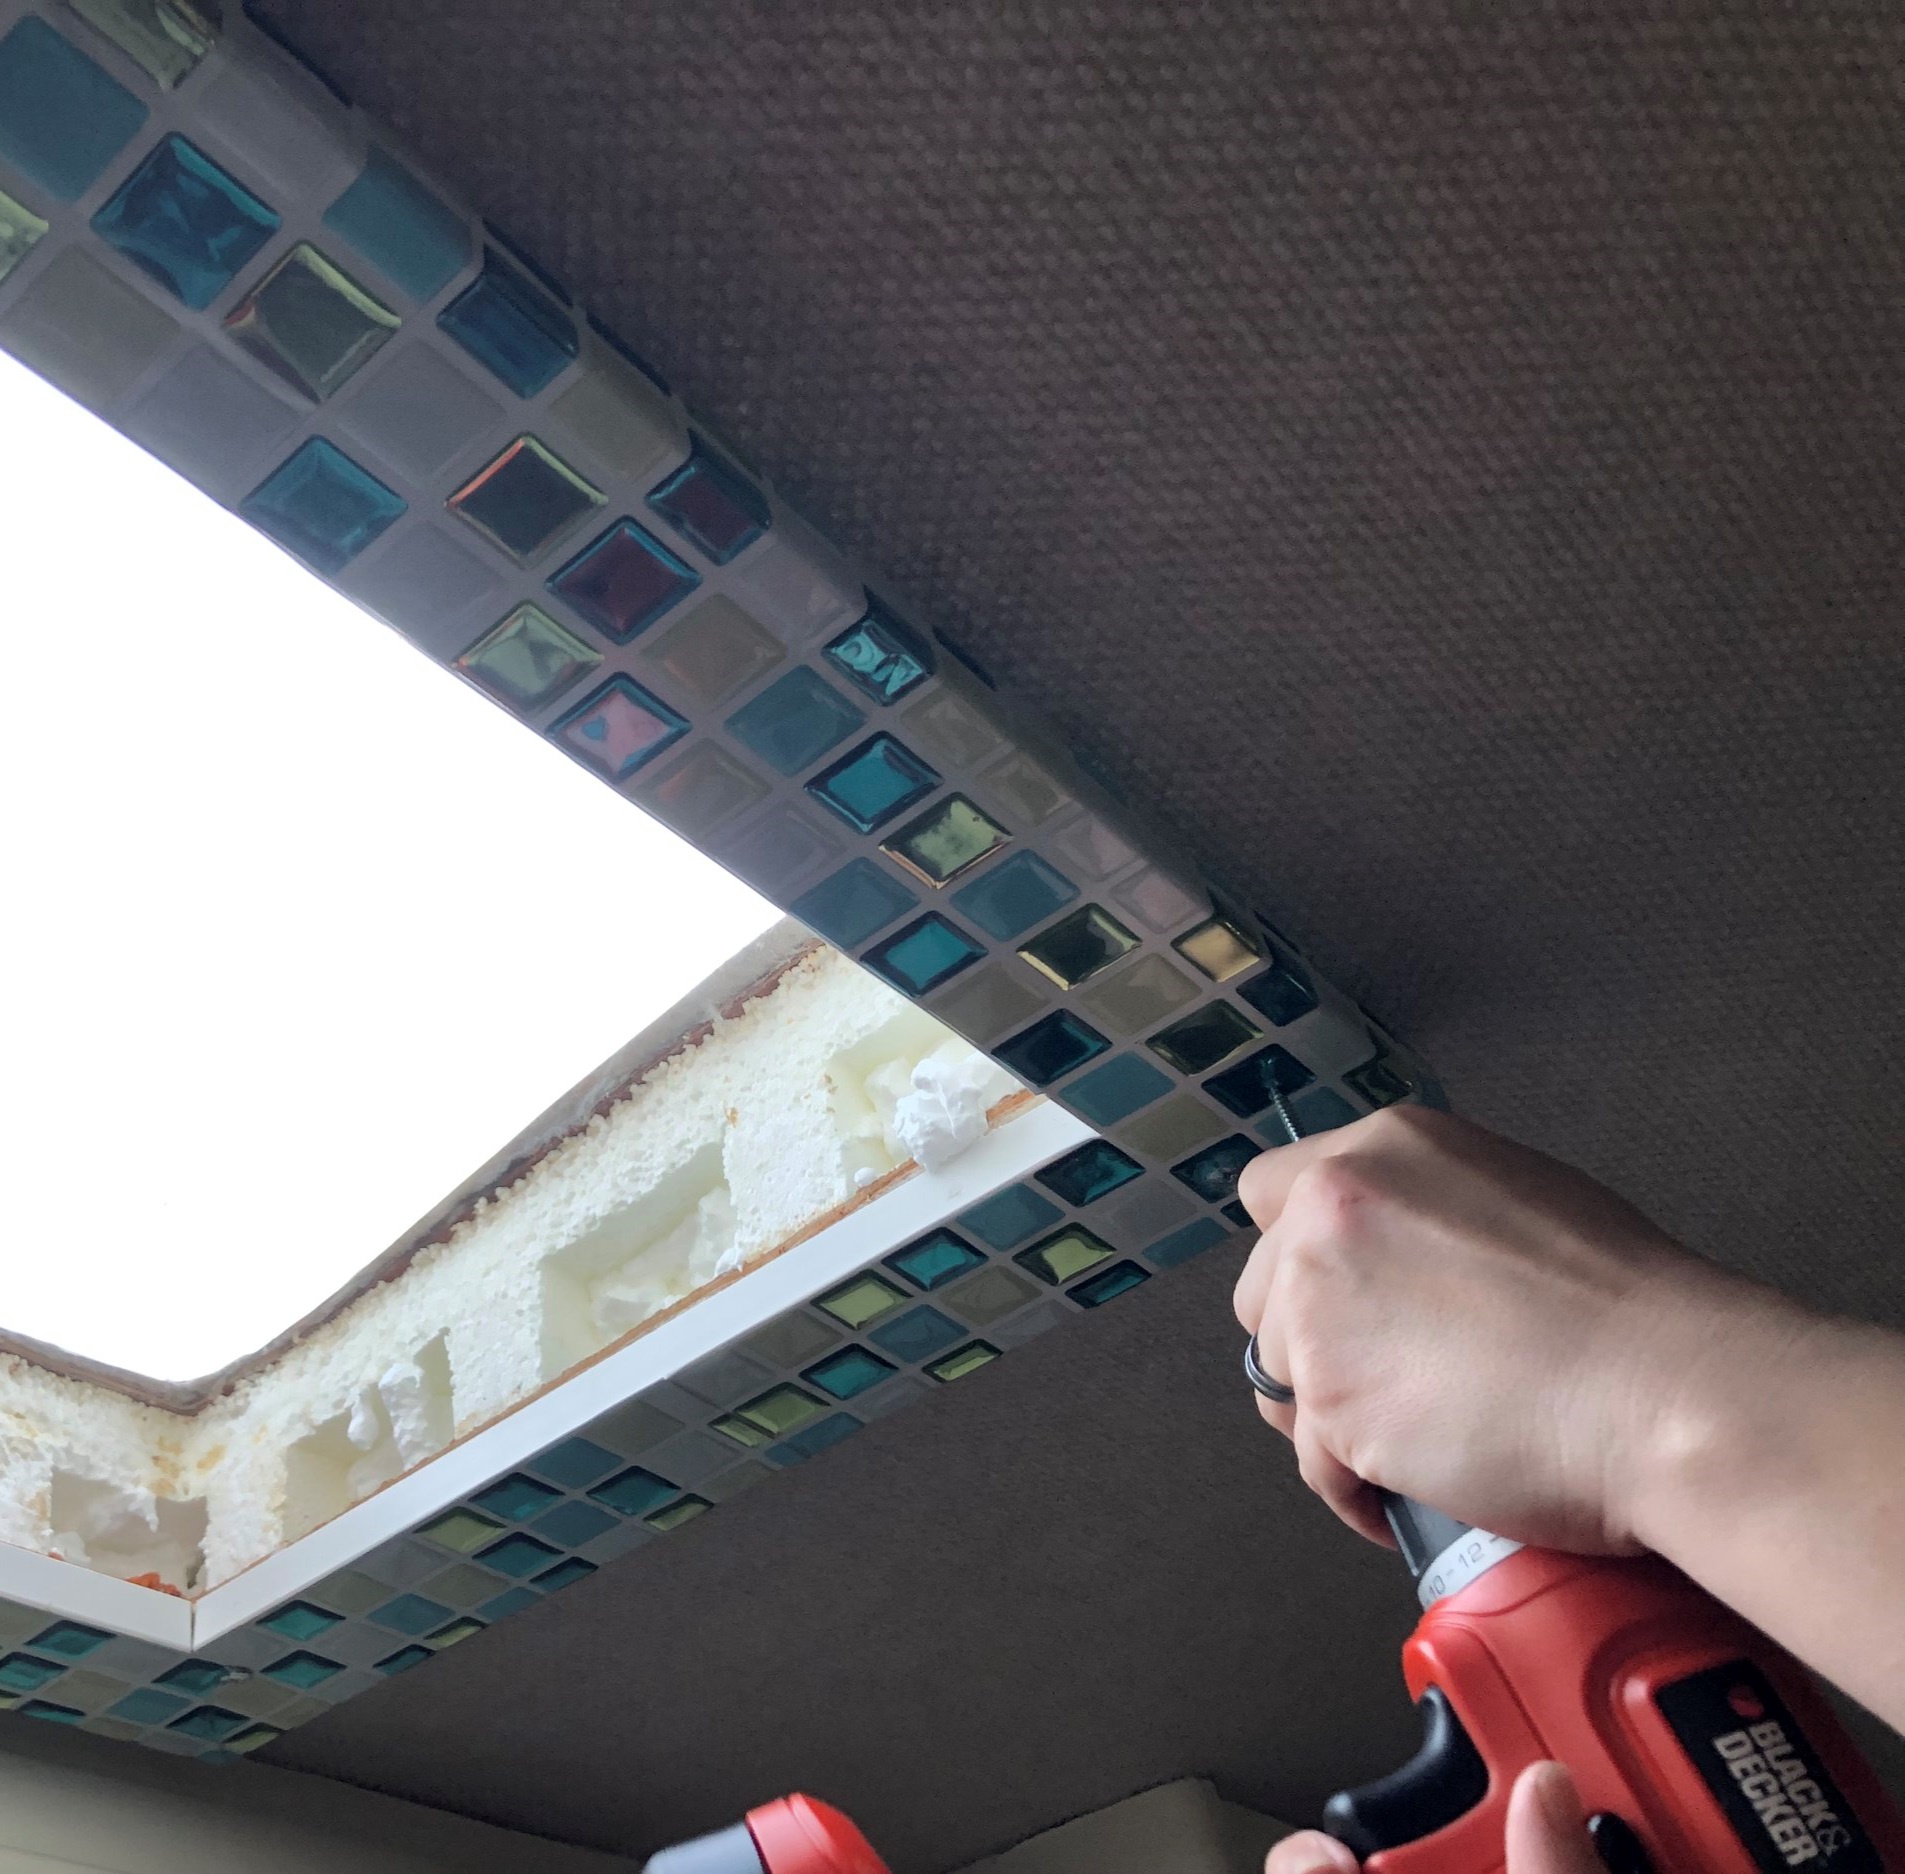 Attaching the frame to the ceiling - we used self-drilling screws for this 